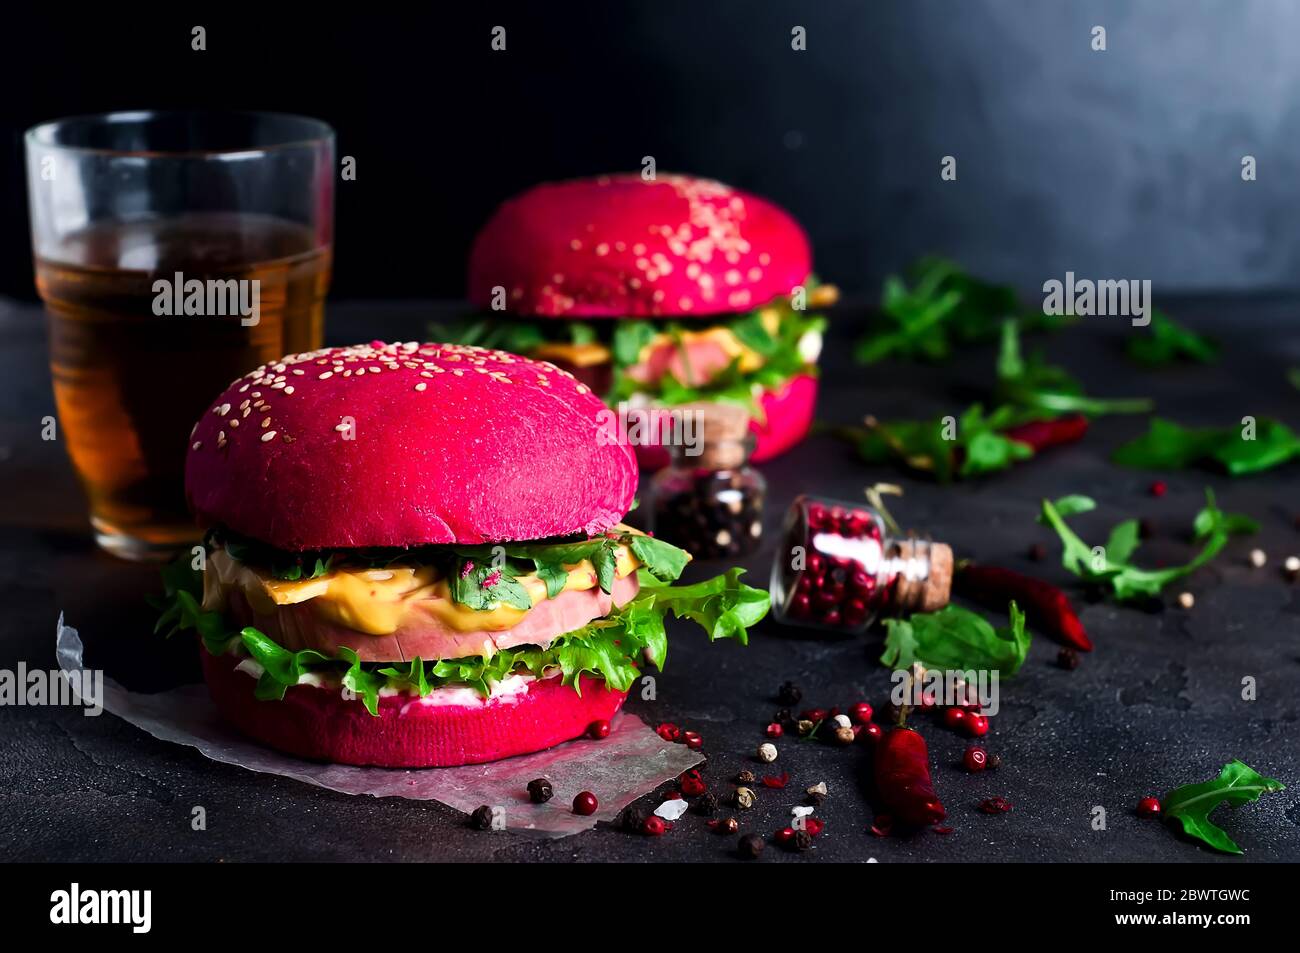 Burgers with red bun and greens on a black background Stock Photo